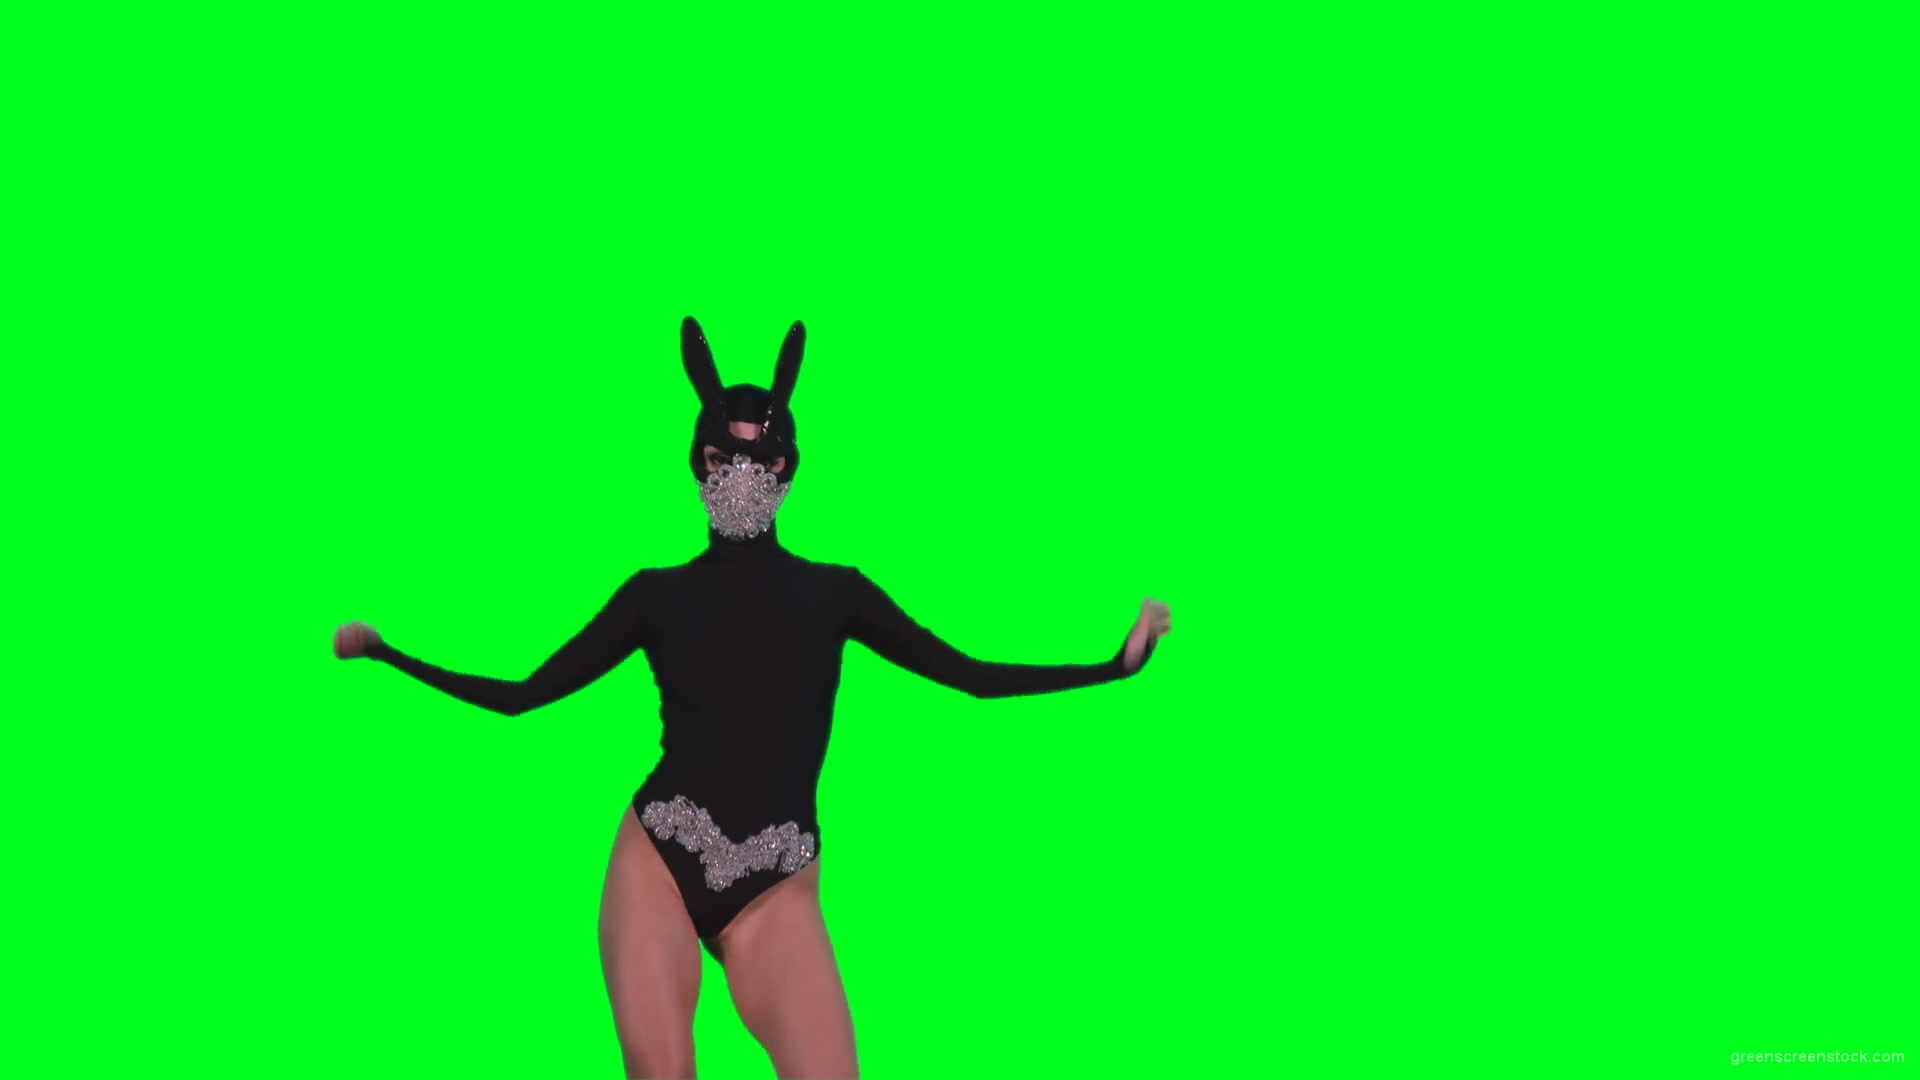 Sexy-bunny-girl-dance-performs-in-rabbit-costume-on-green-screen-4K-Video-Footage-1920_007 Green Screen Stock